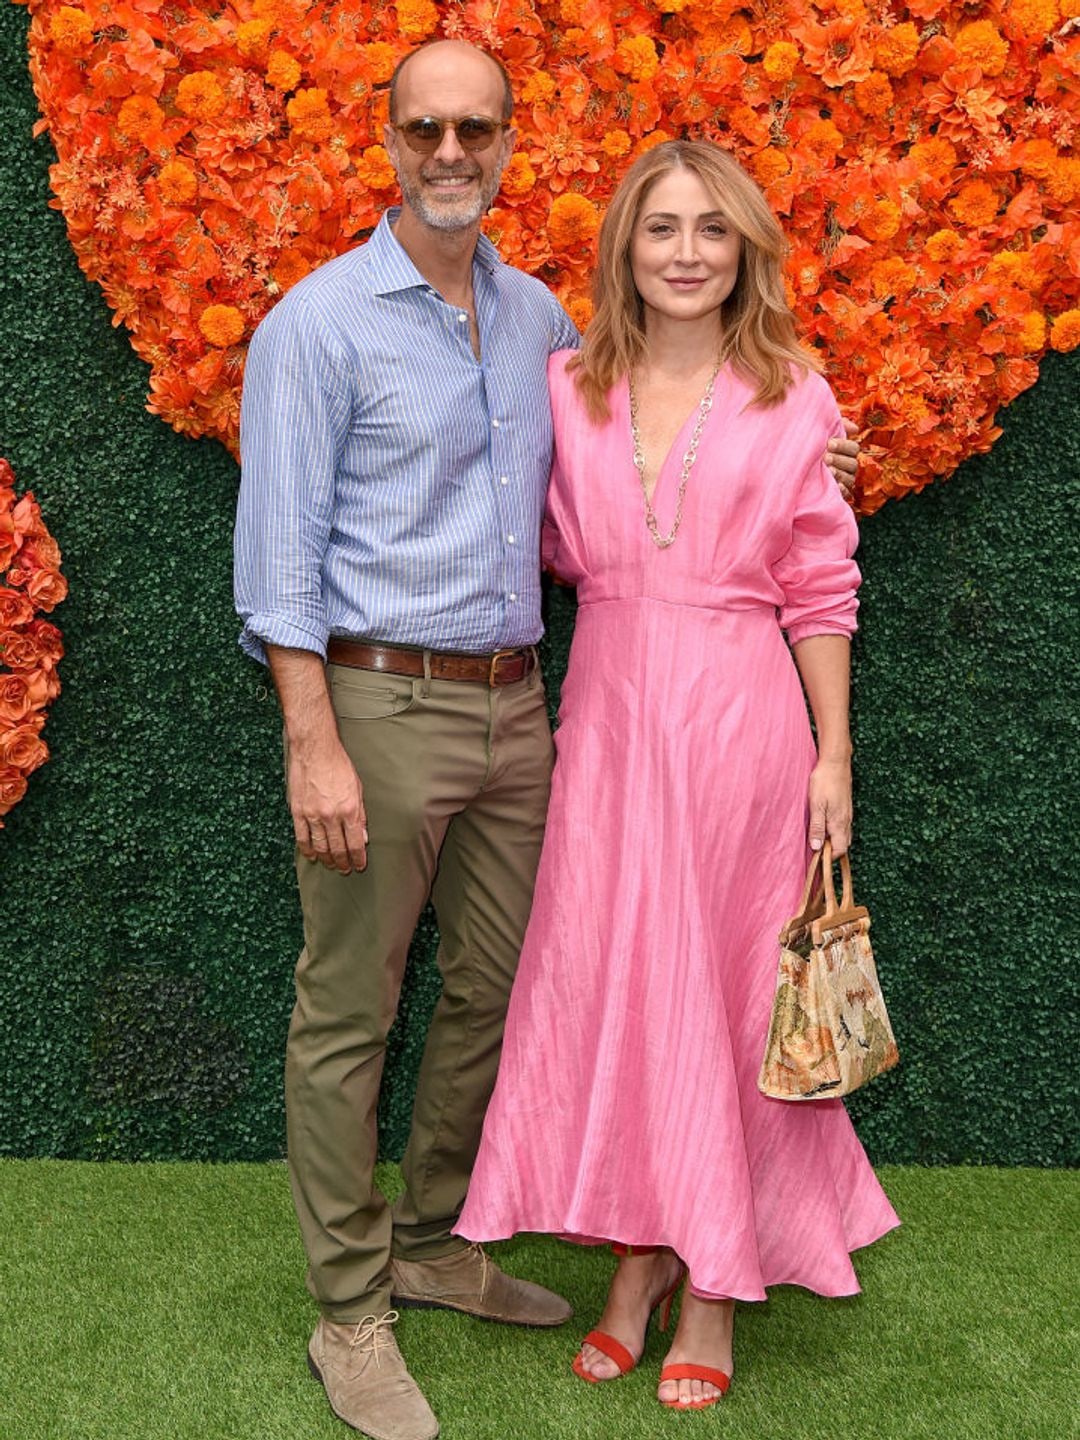 Sasha Alexander cuddled up with Edoardo Ponti at a press event. She is wearing a pink midi dress, while he is wearing a blue striped shirt and chinos. 